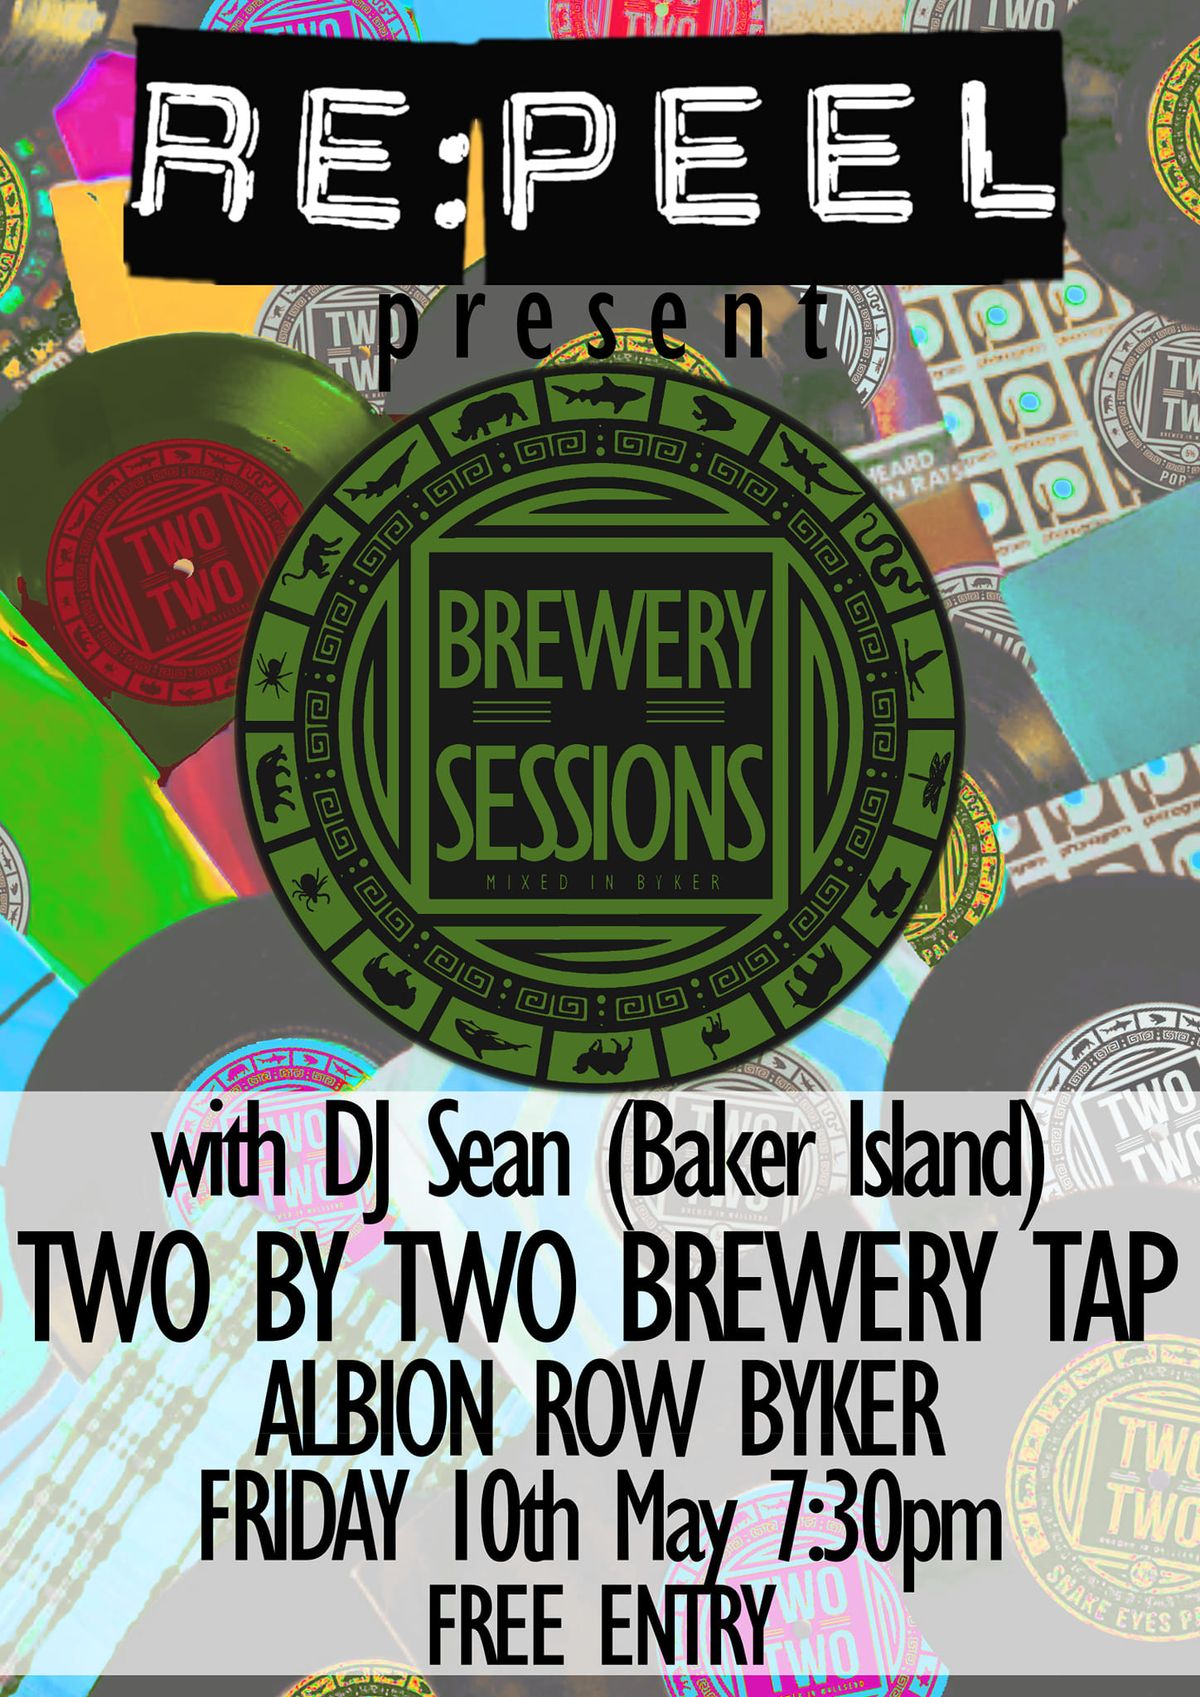 Brewery Sessions with DJ Sean (Baker Island)